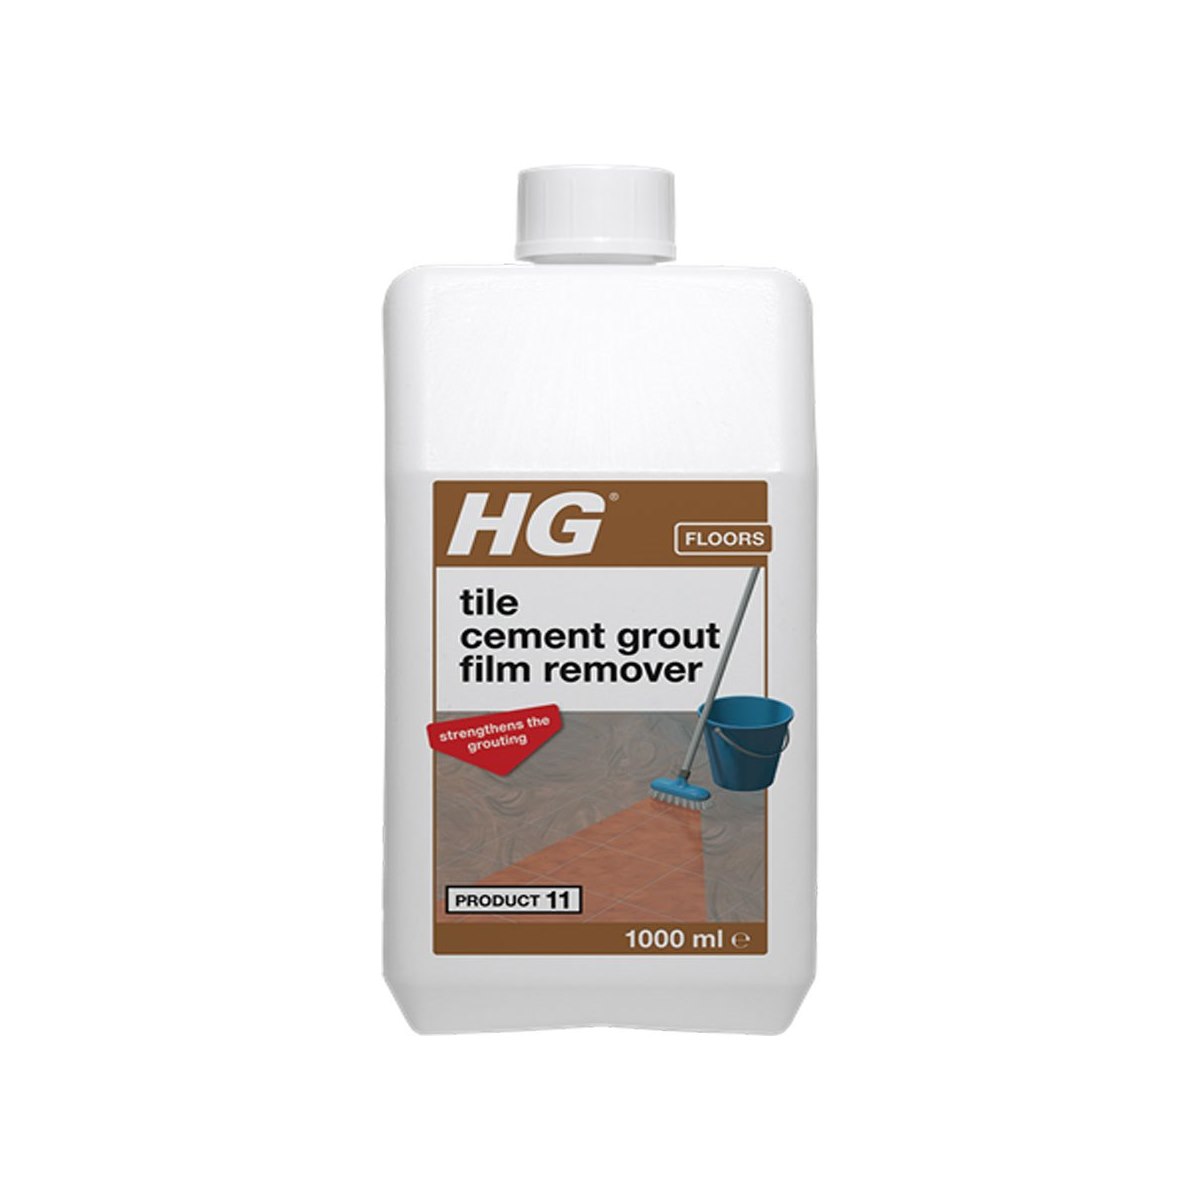 HG Cement Grout Film Remover 1 Litre Product 11